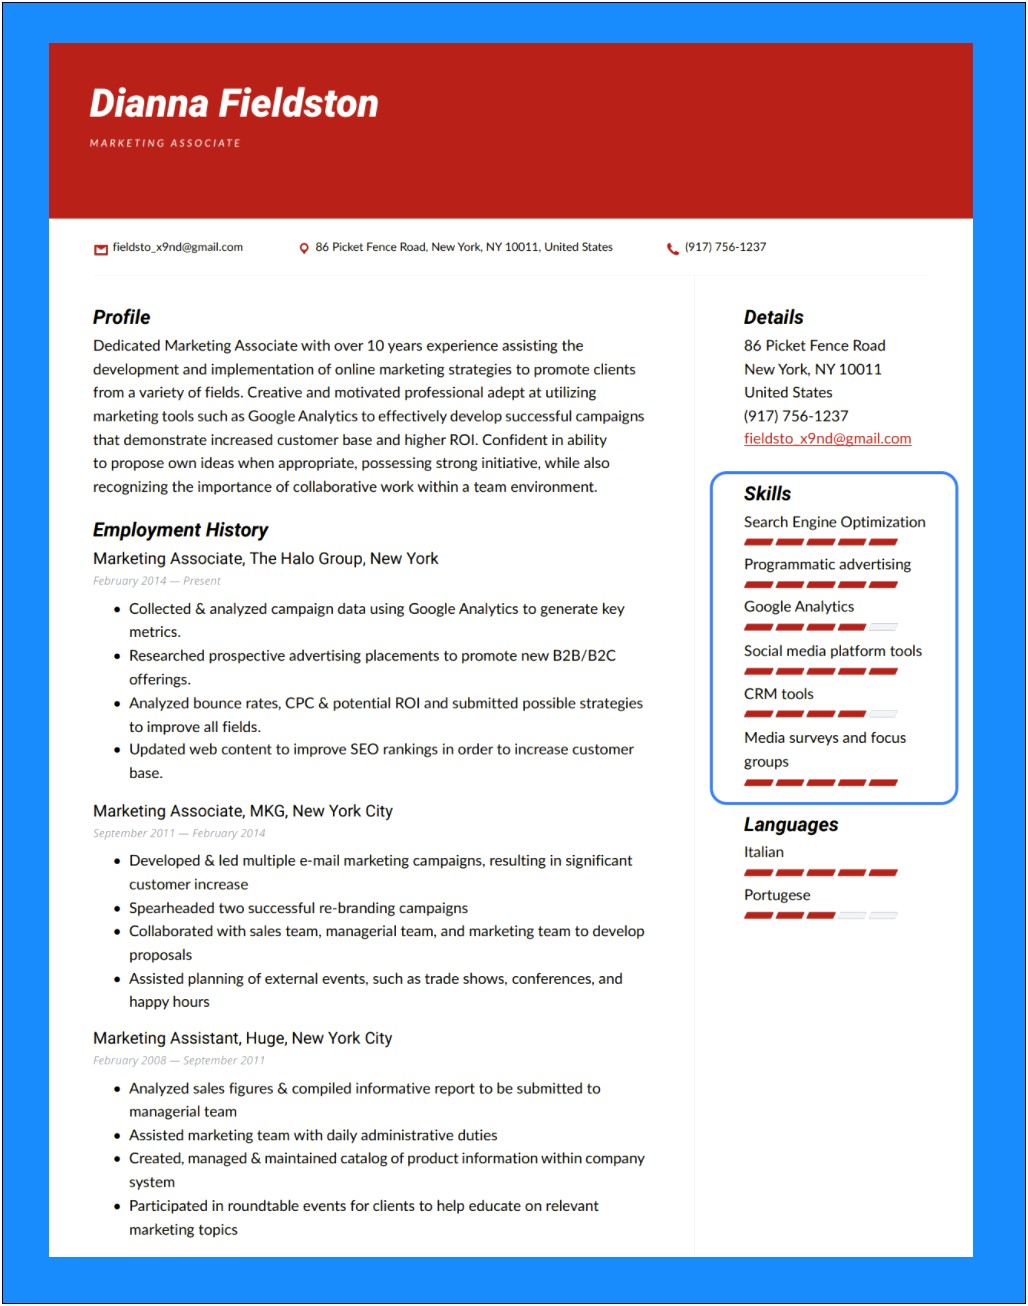 List Of Key Skills For Resume Examples